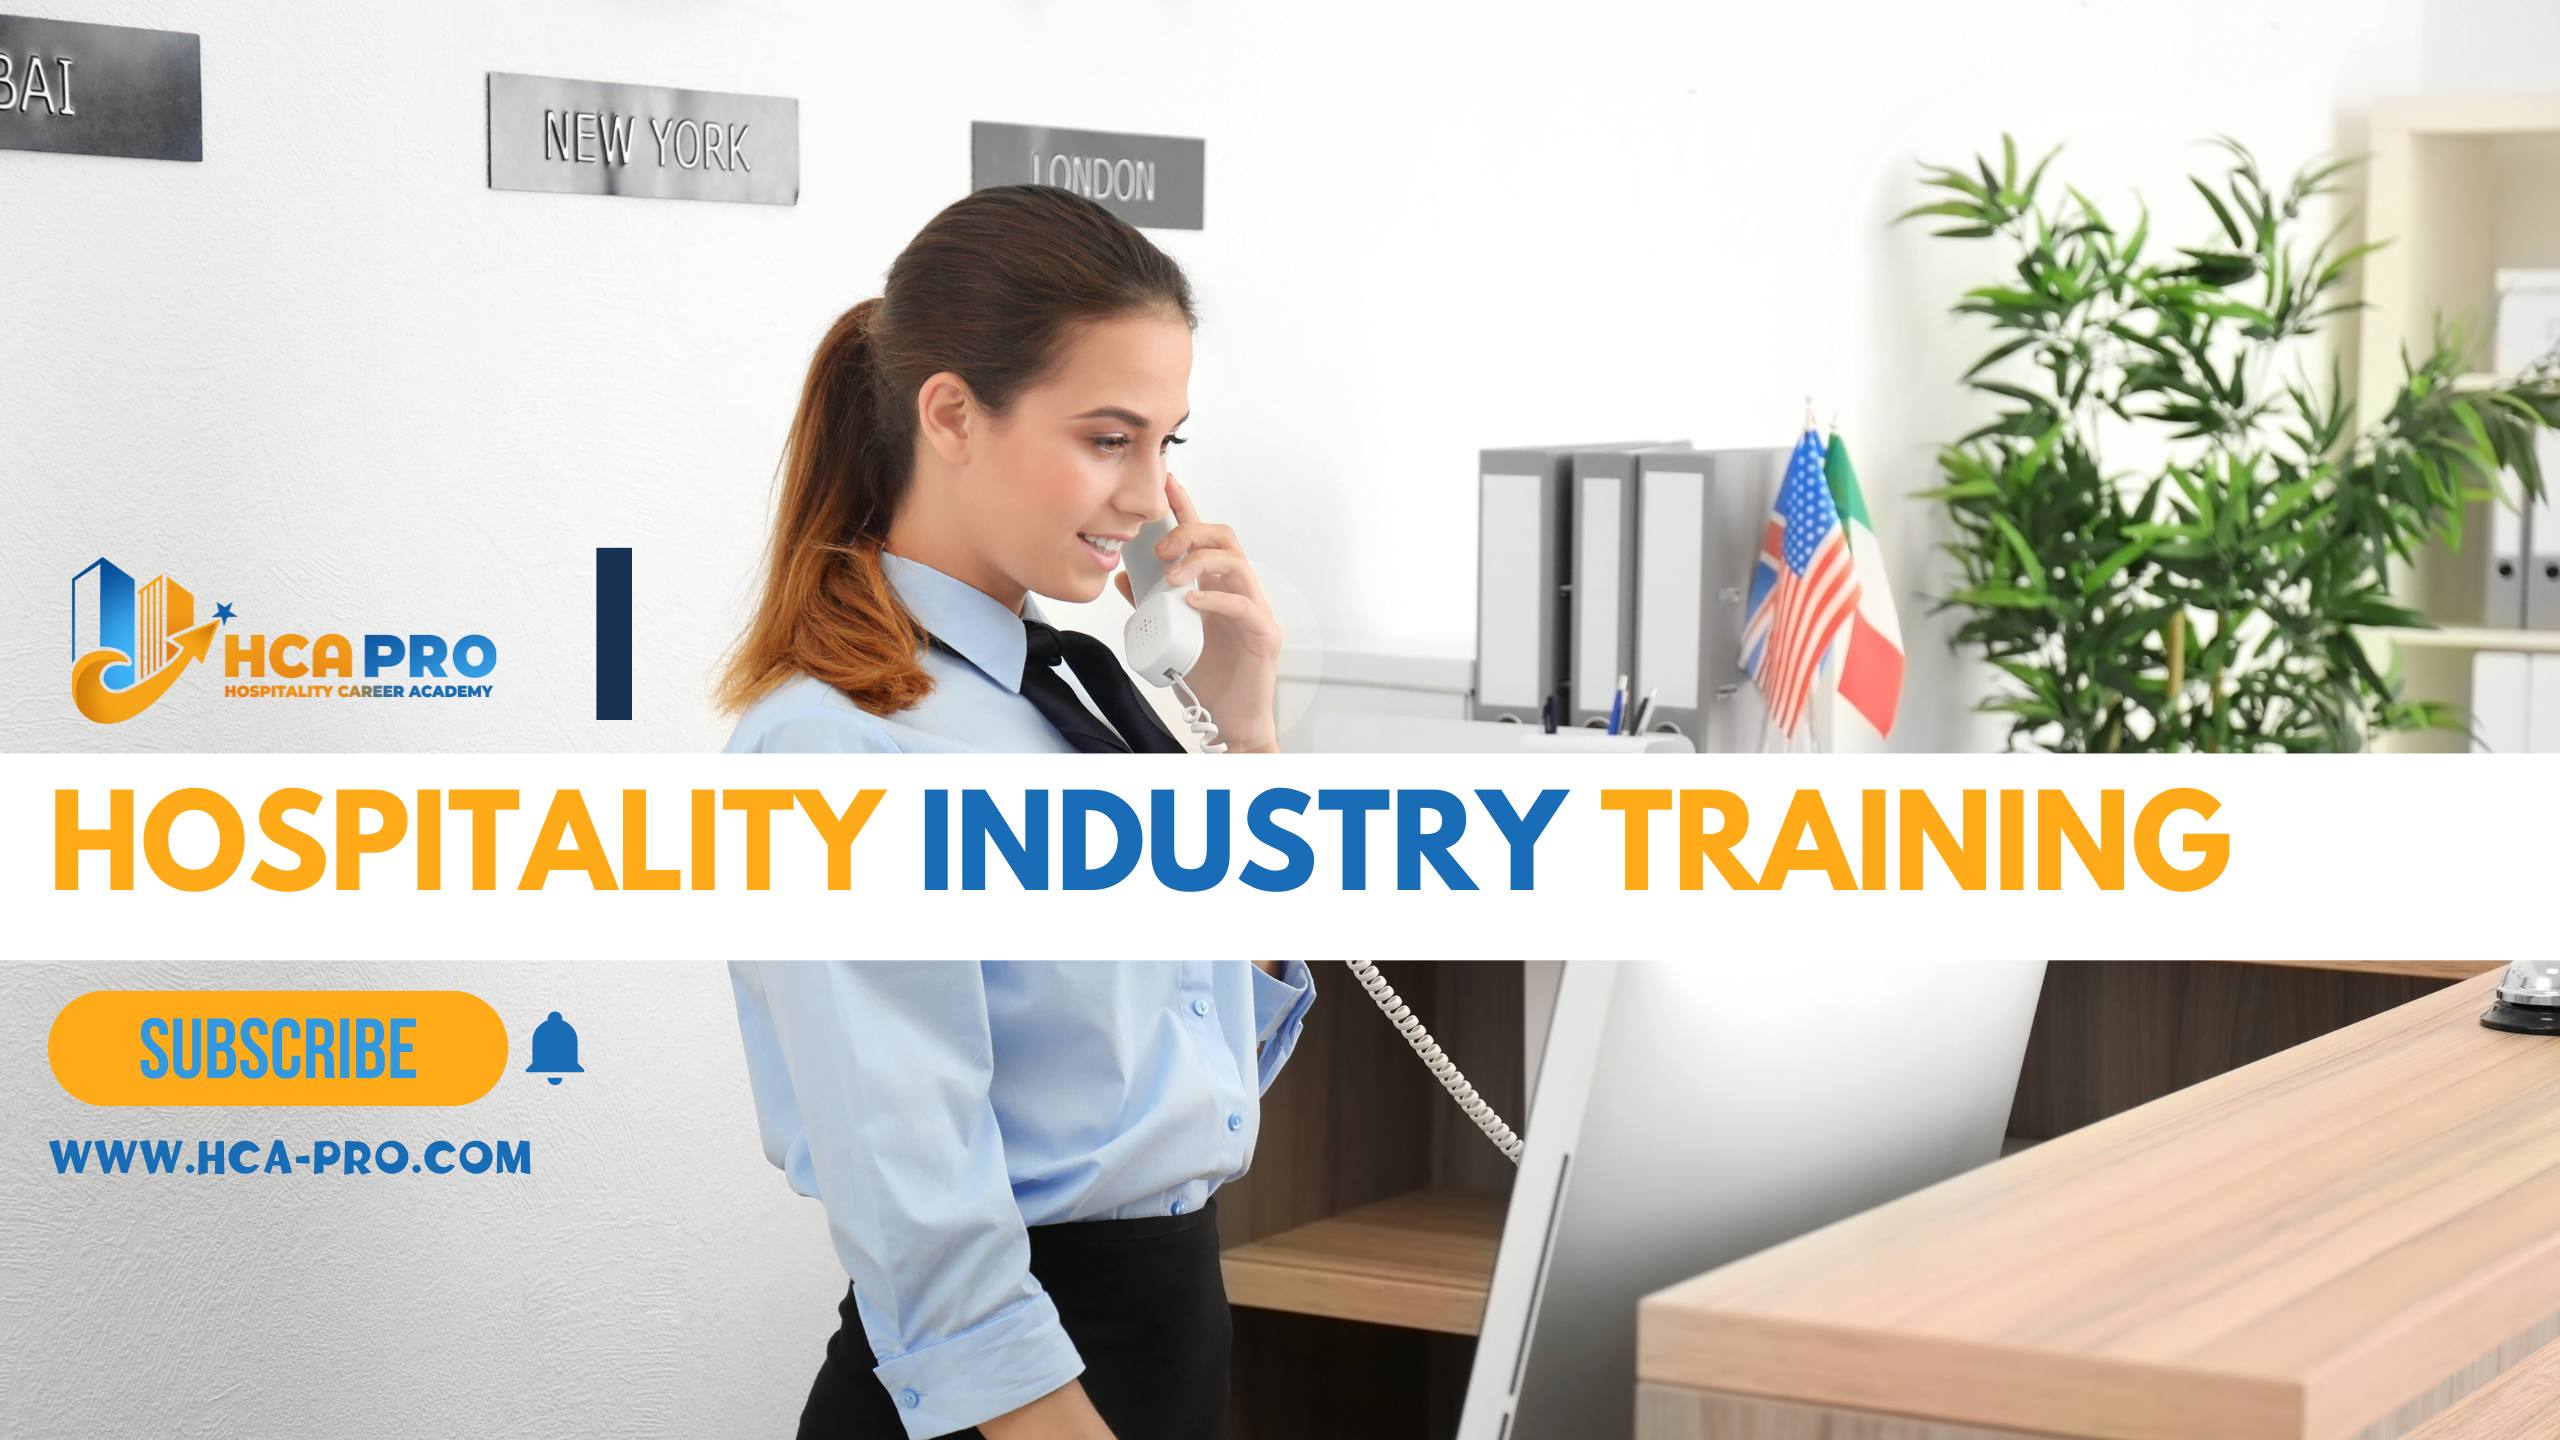 The hospitality industry includes a wide range of businesses that provide services to travelers and tourists, such as hotels, resorts, restaurants, and event venues. Training in the hospitality industry is important because it helps employees understand t